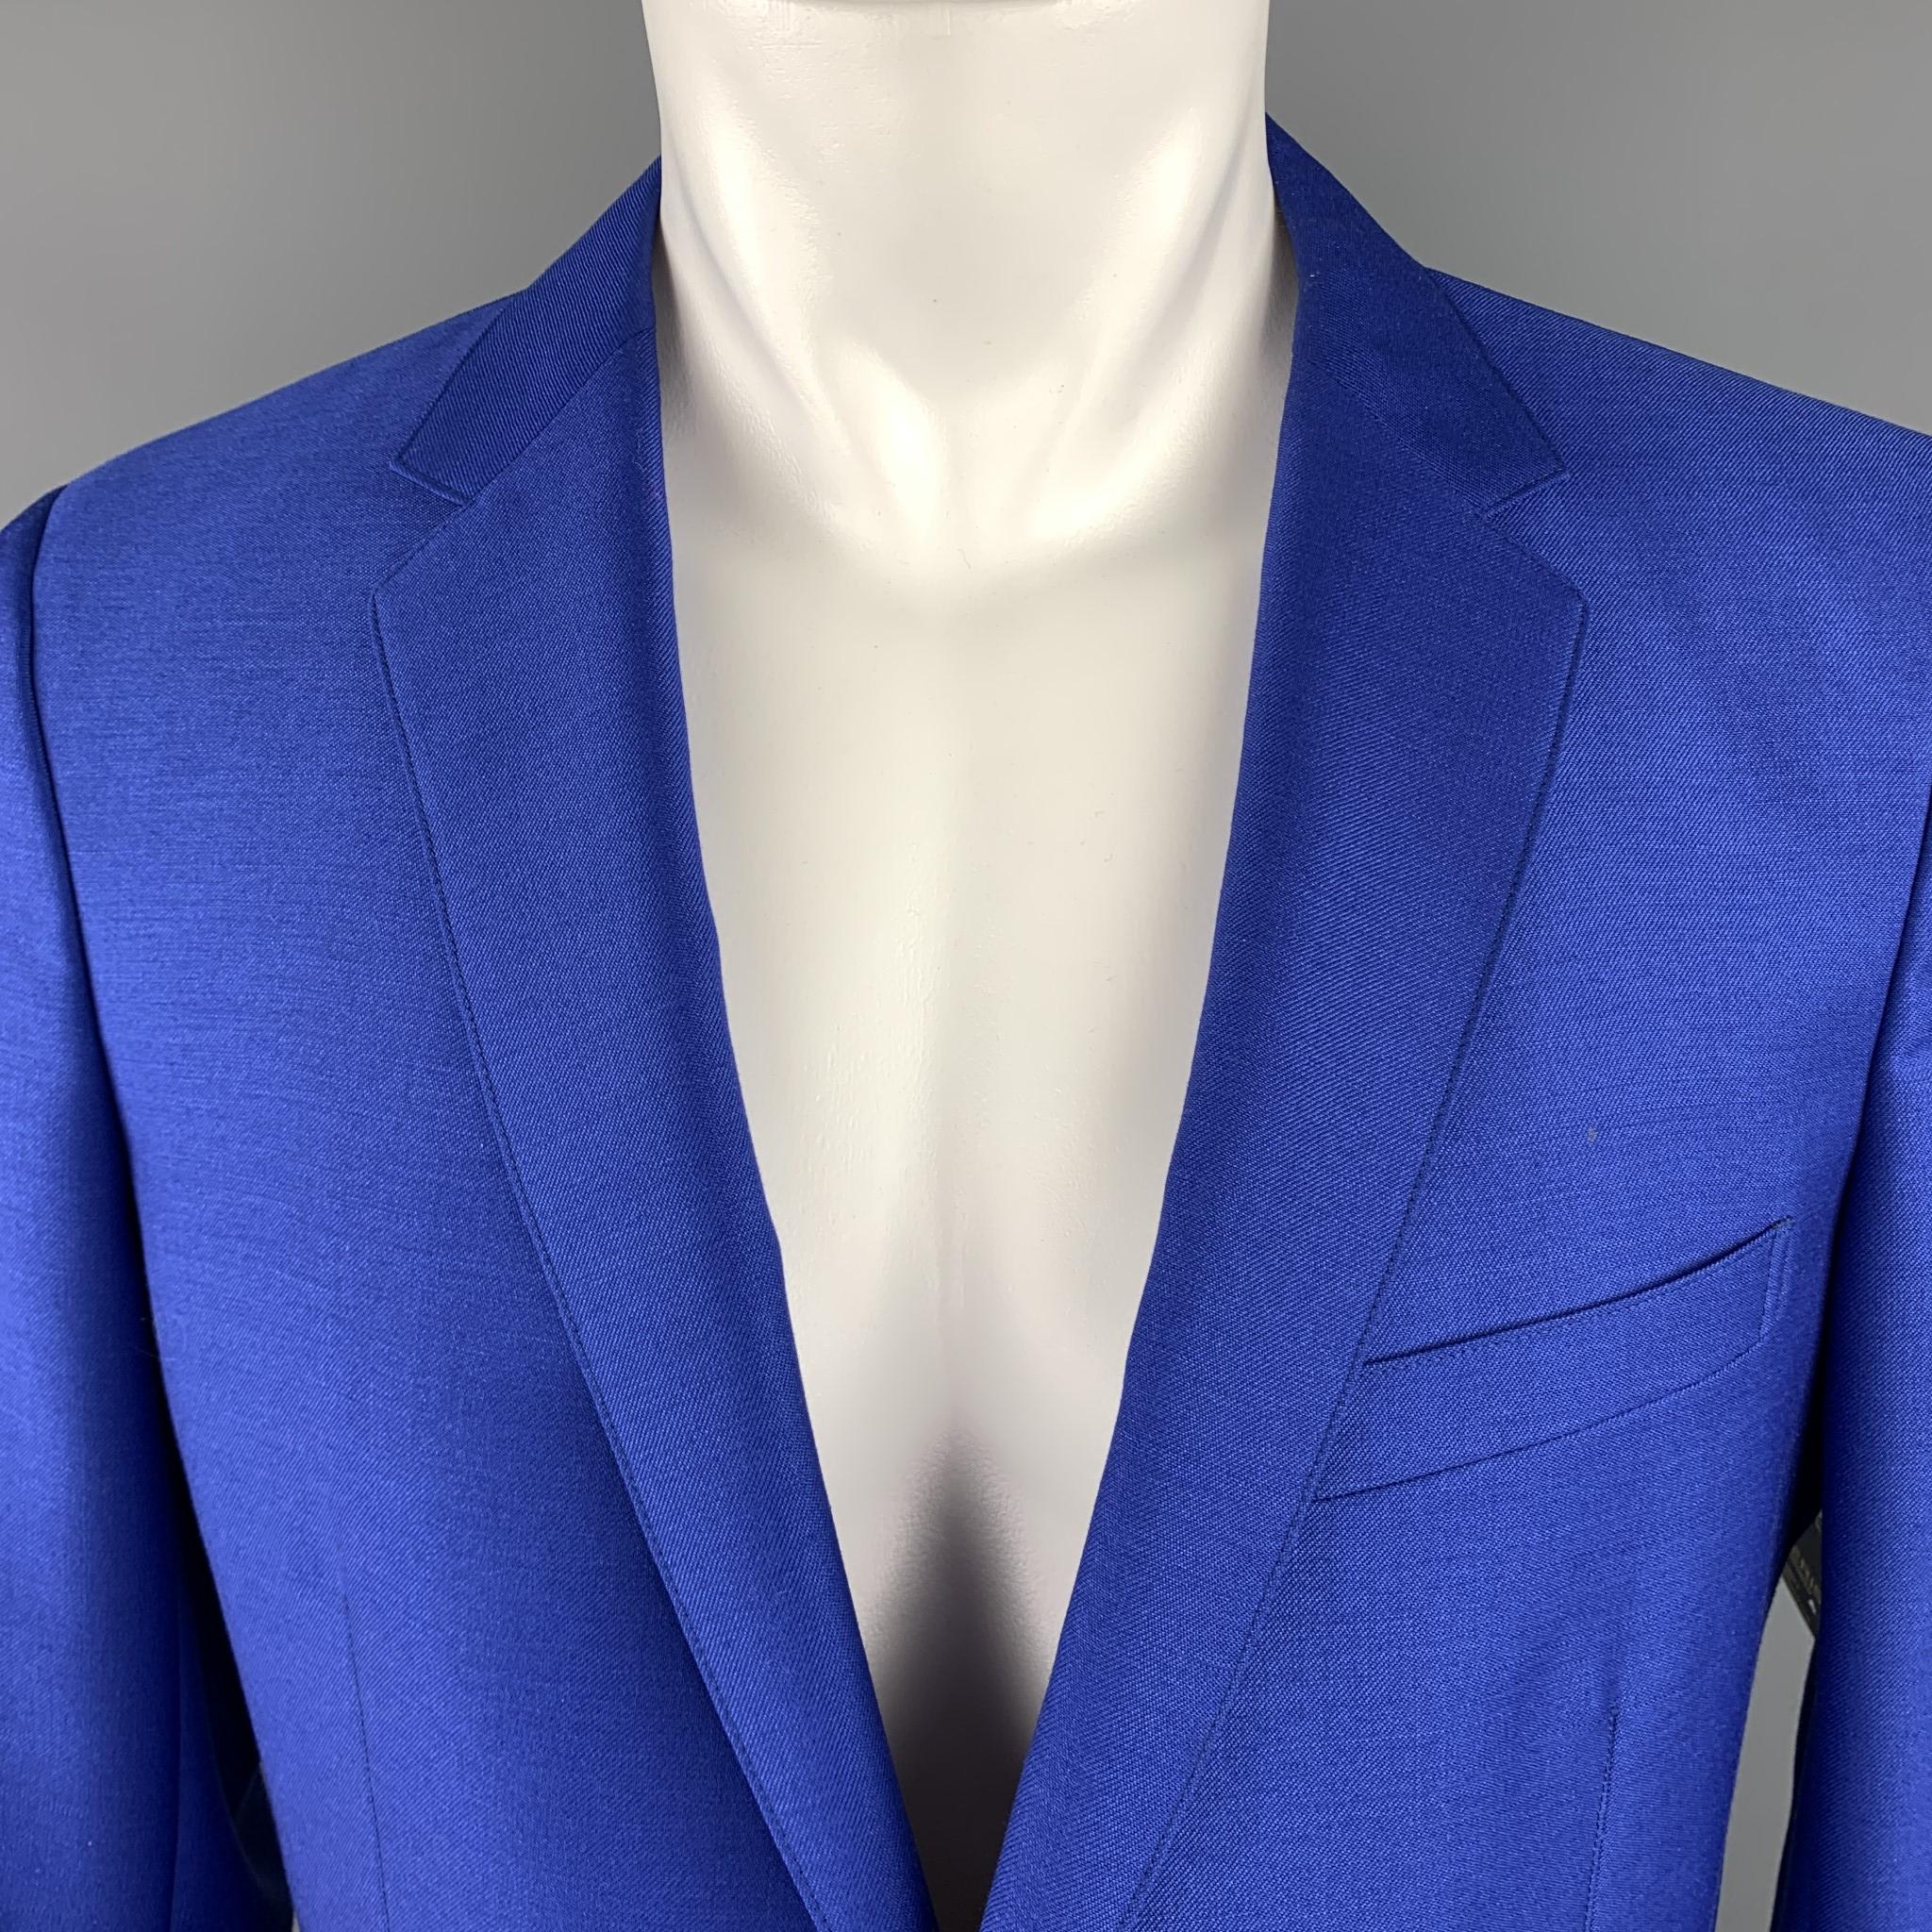 JIL SANDER by RAF SIMONS sport coat comes in vibrant royal blue wool mohair blend with a notch lapel, single breasted, two button front, and cropped effect sleeves. Made in Italy.

Excellent Pre-Owned Condition.
Marked: IT